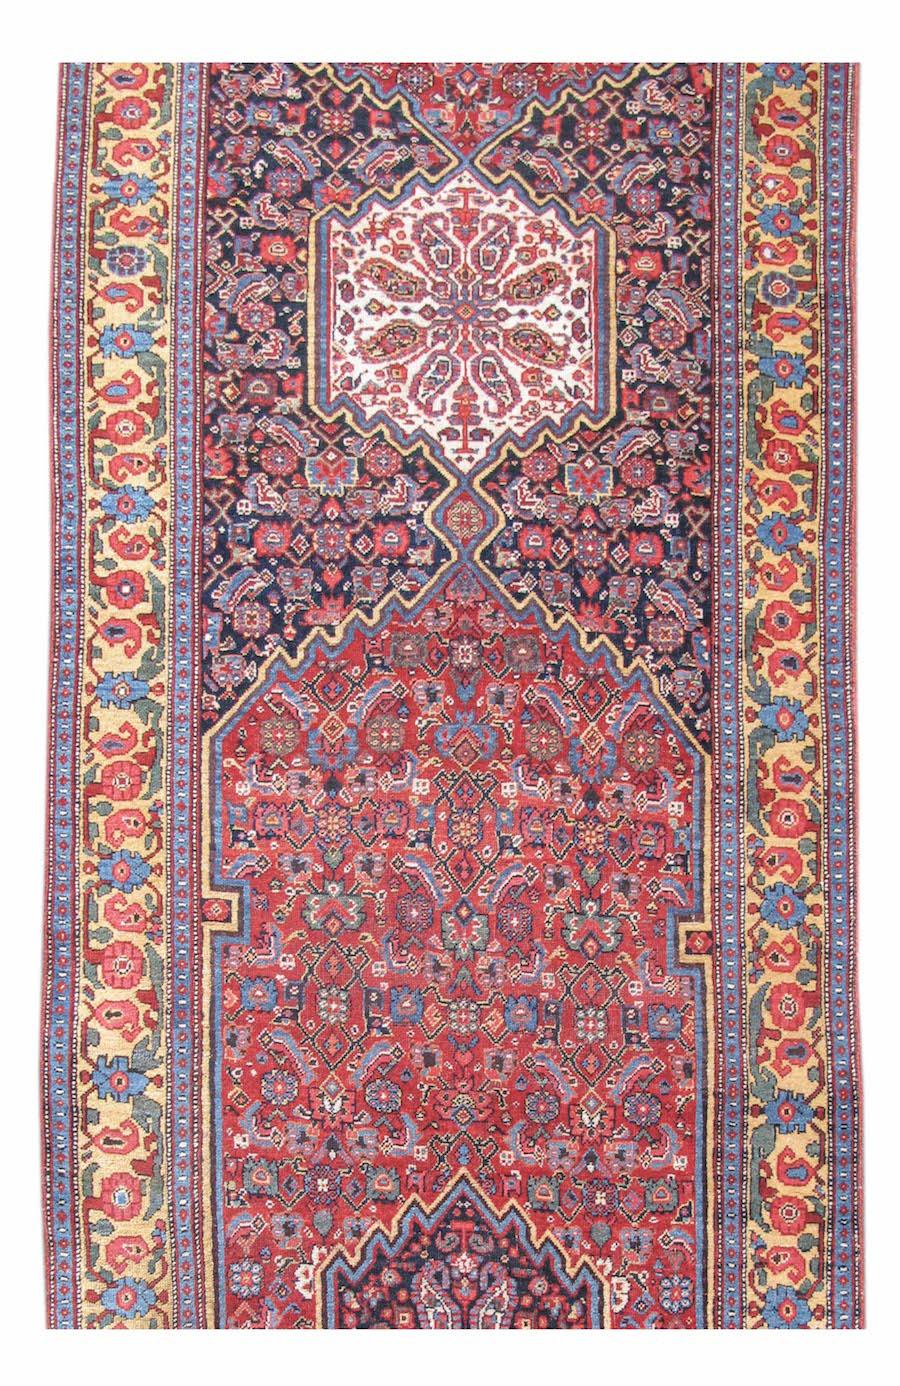 This elegant Bidjar runner balances the grandeur of a room size medallion carpet with the refinement of a more intimate piece. Runners present the weaver with a Challenge in their composition. Their narrow width limits the potential impact of field